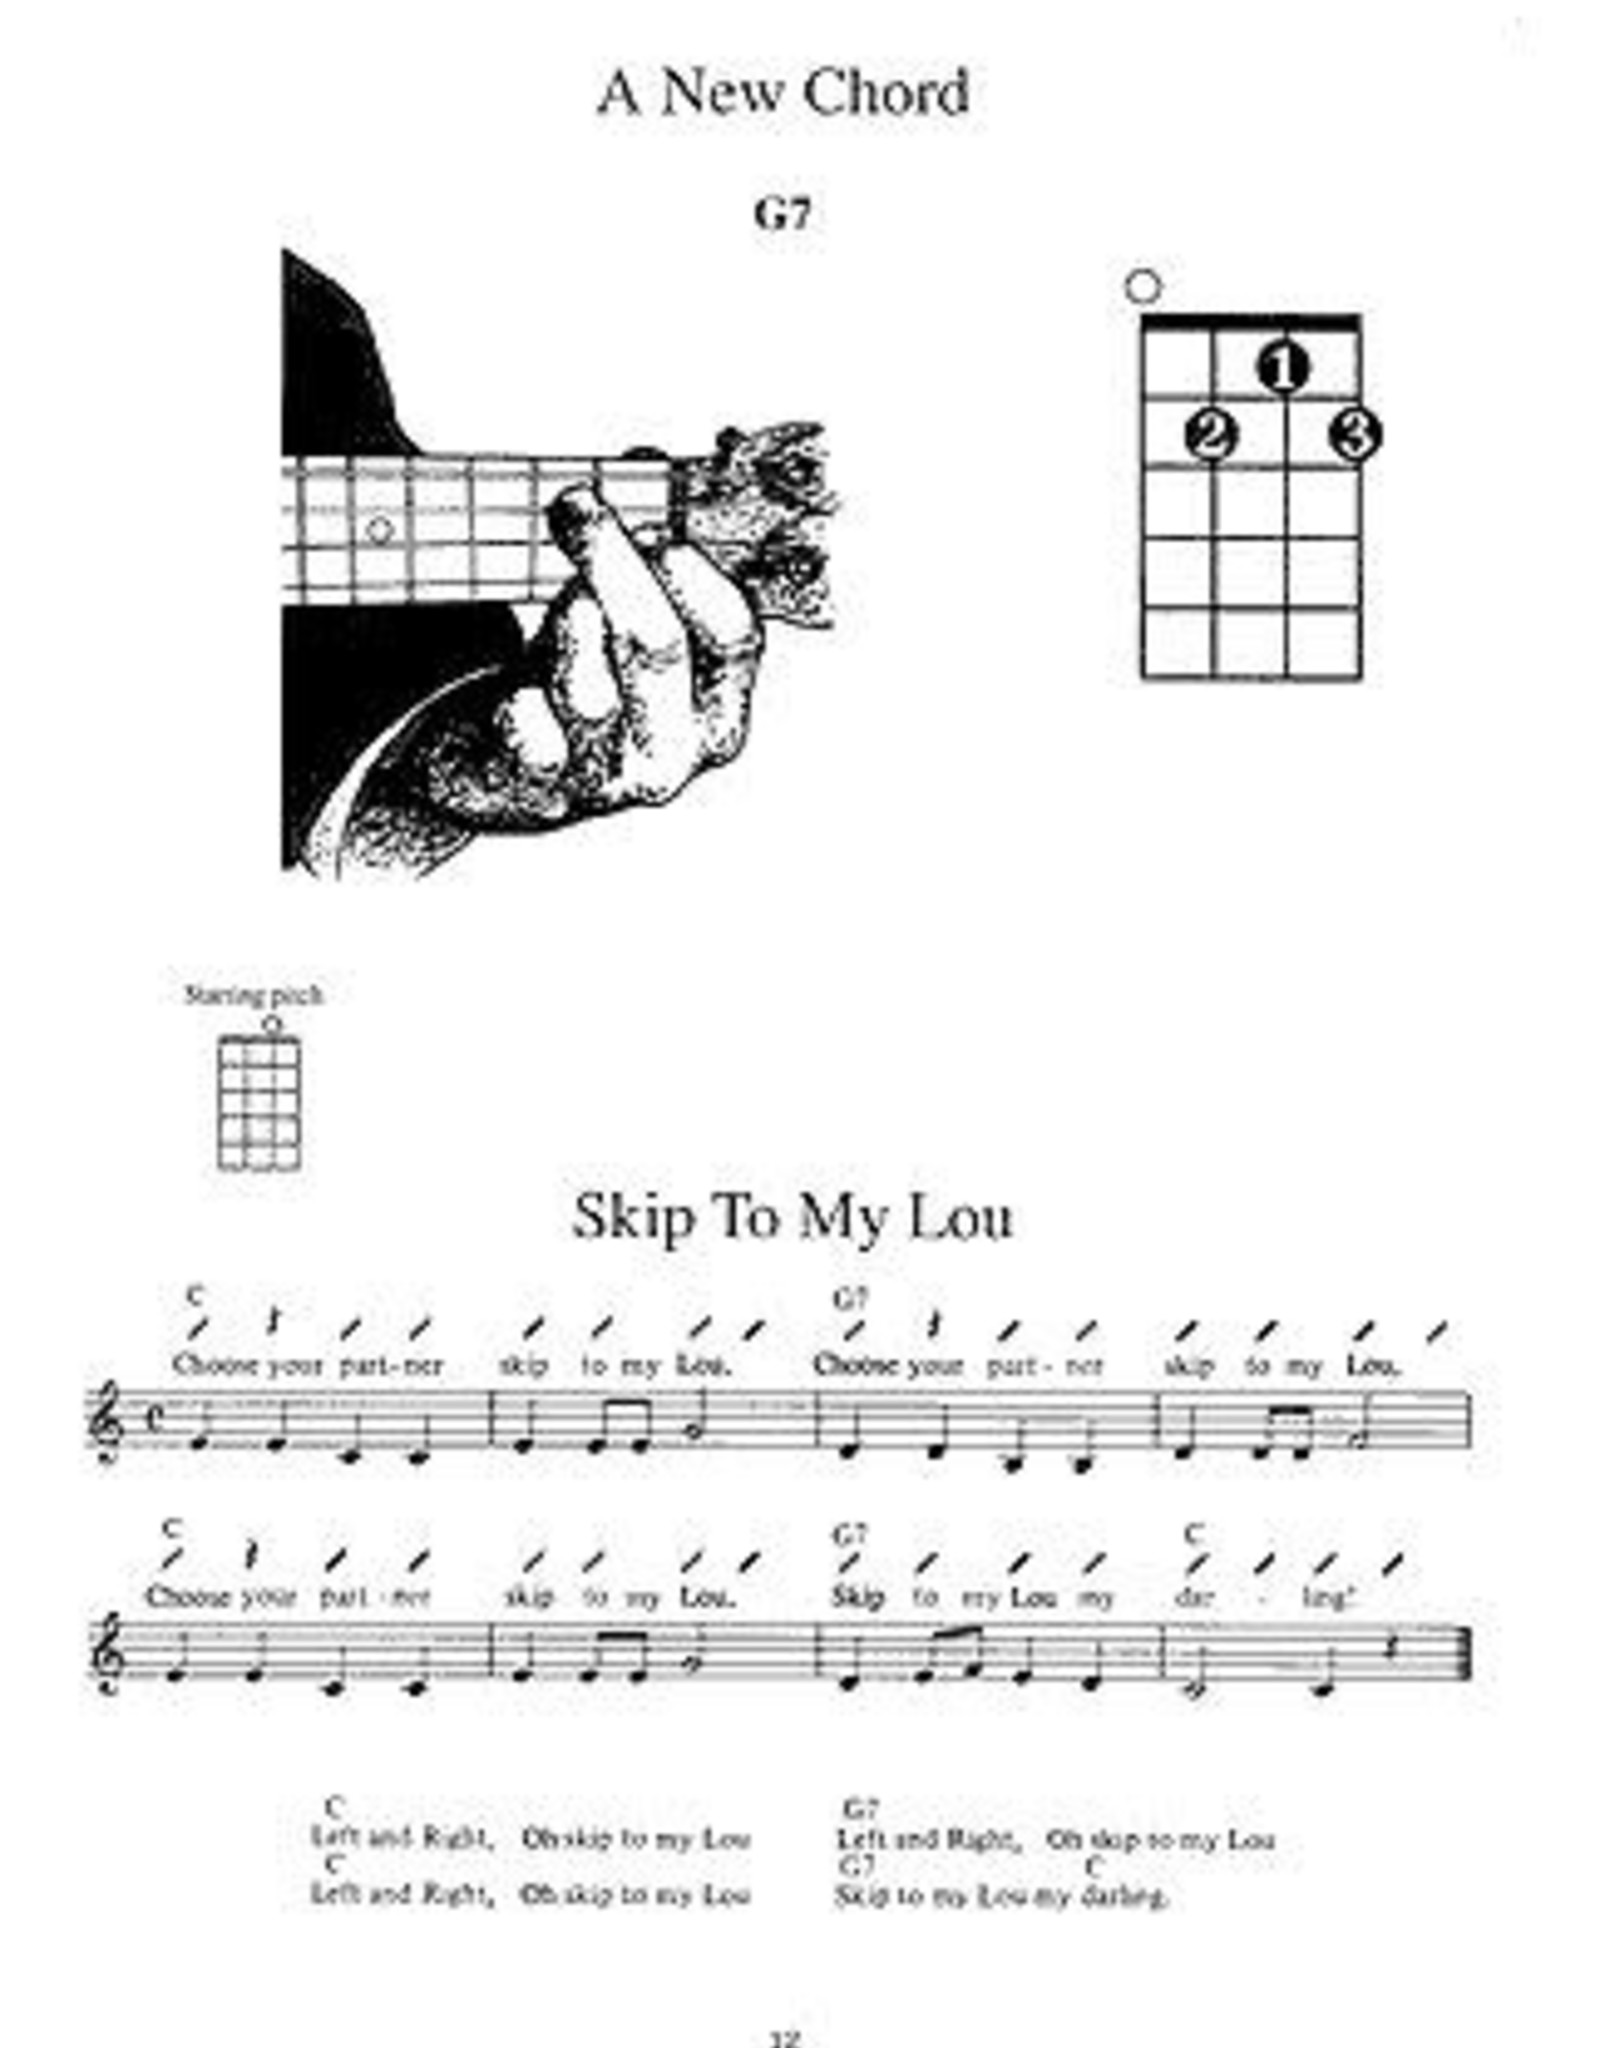 Mel Bay Publications, Inc. You Can Teach Yourself Uke by William Bay with Online Access